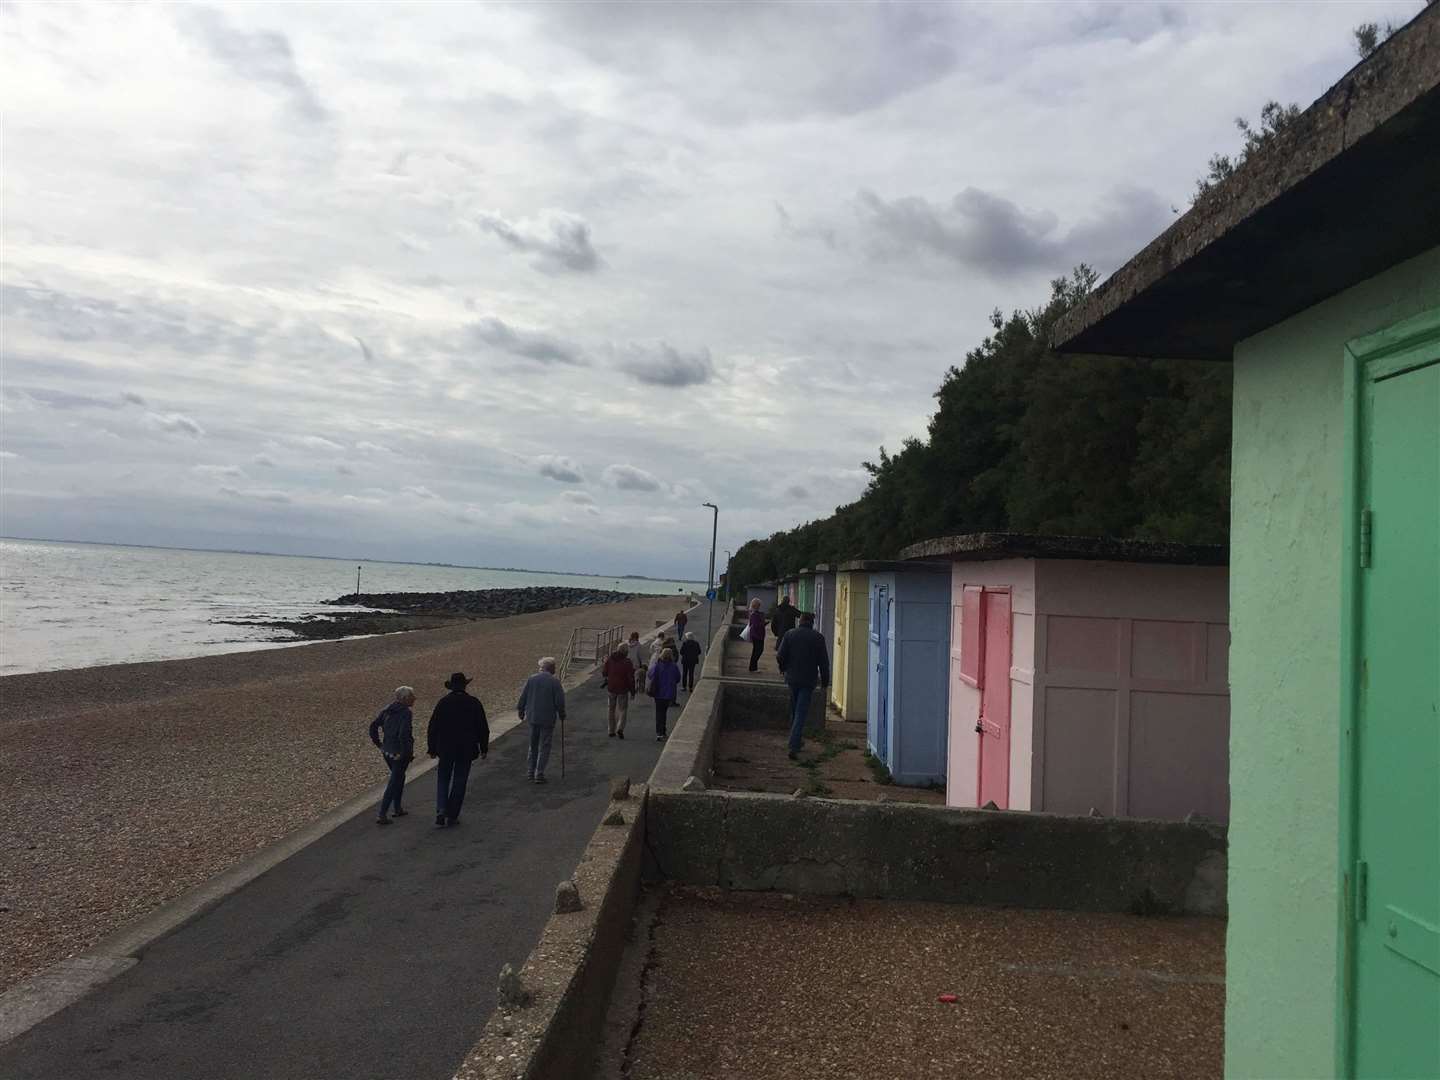 The initial plans revealed that many of the existing beach huts will be torn down